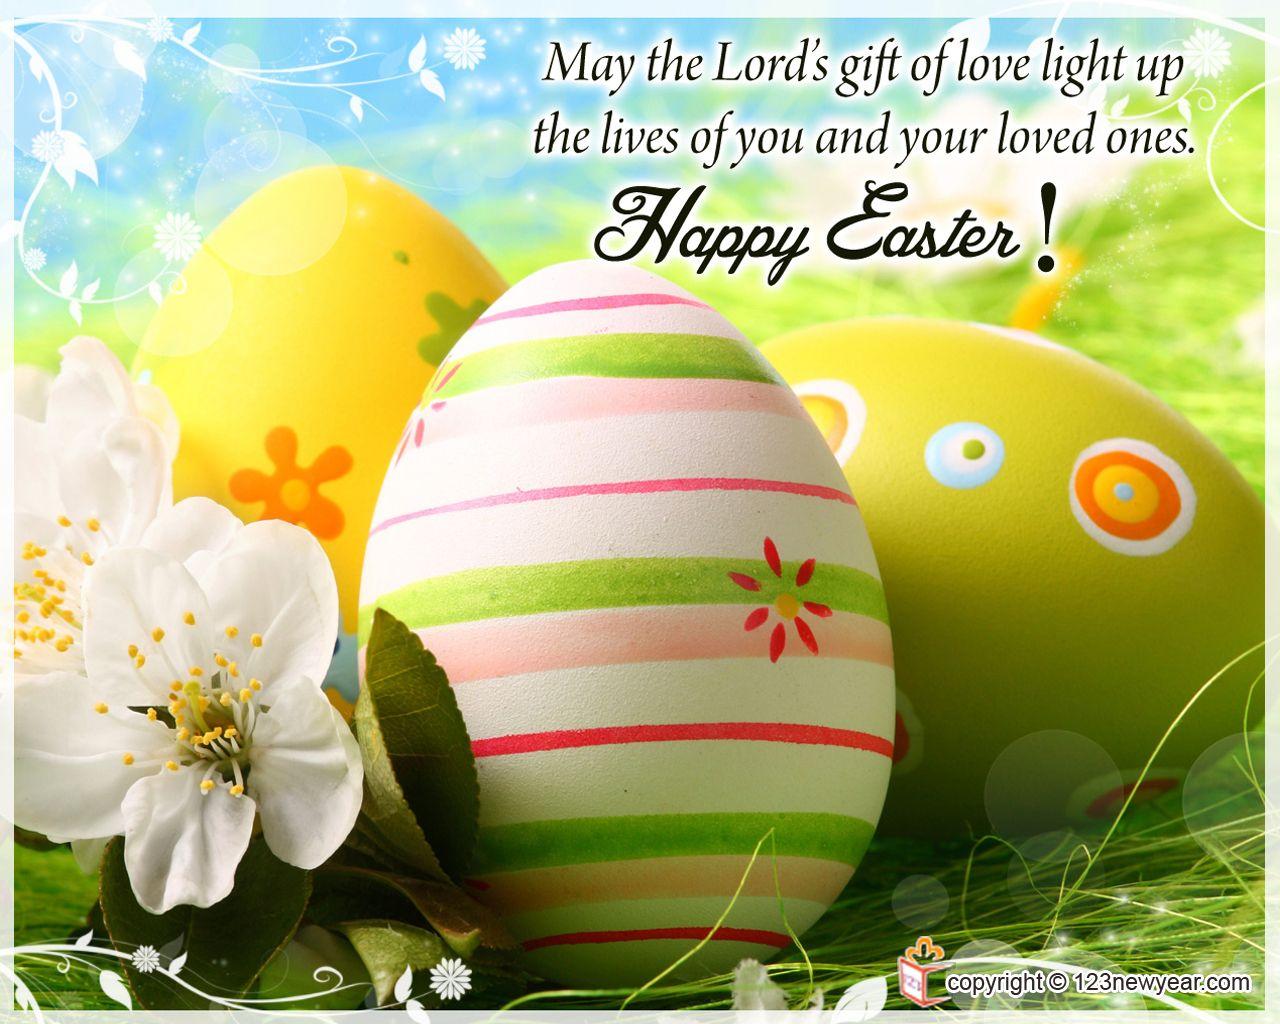 Easter Sunday Picture. Happy easter greetings, Easter sunday